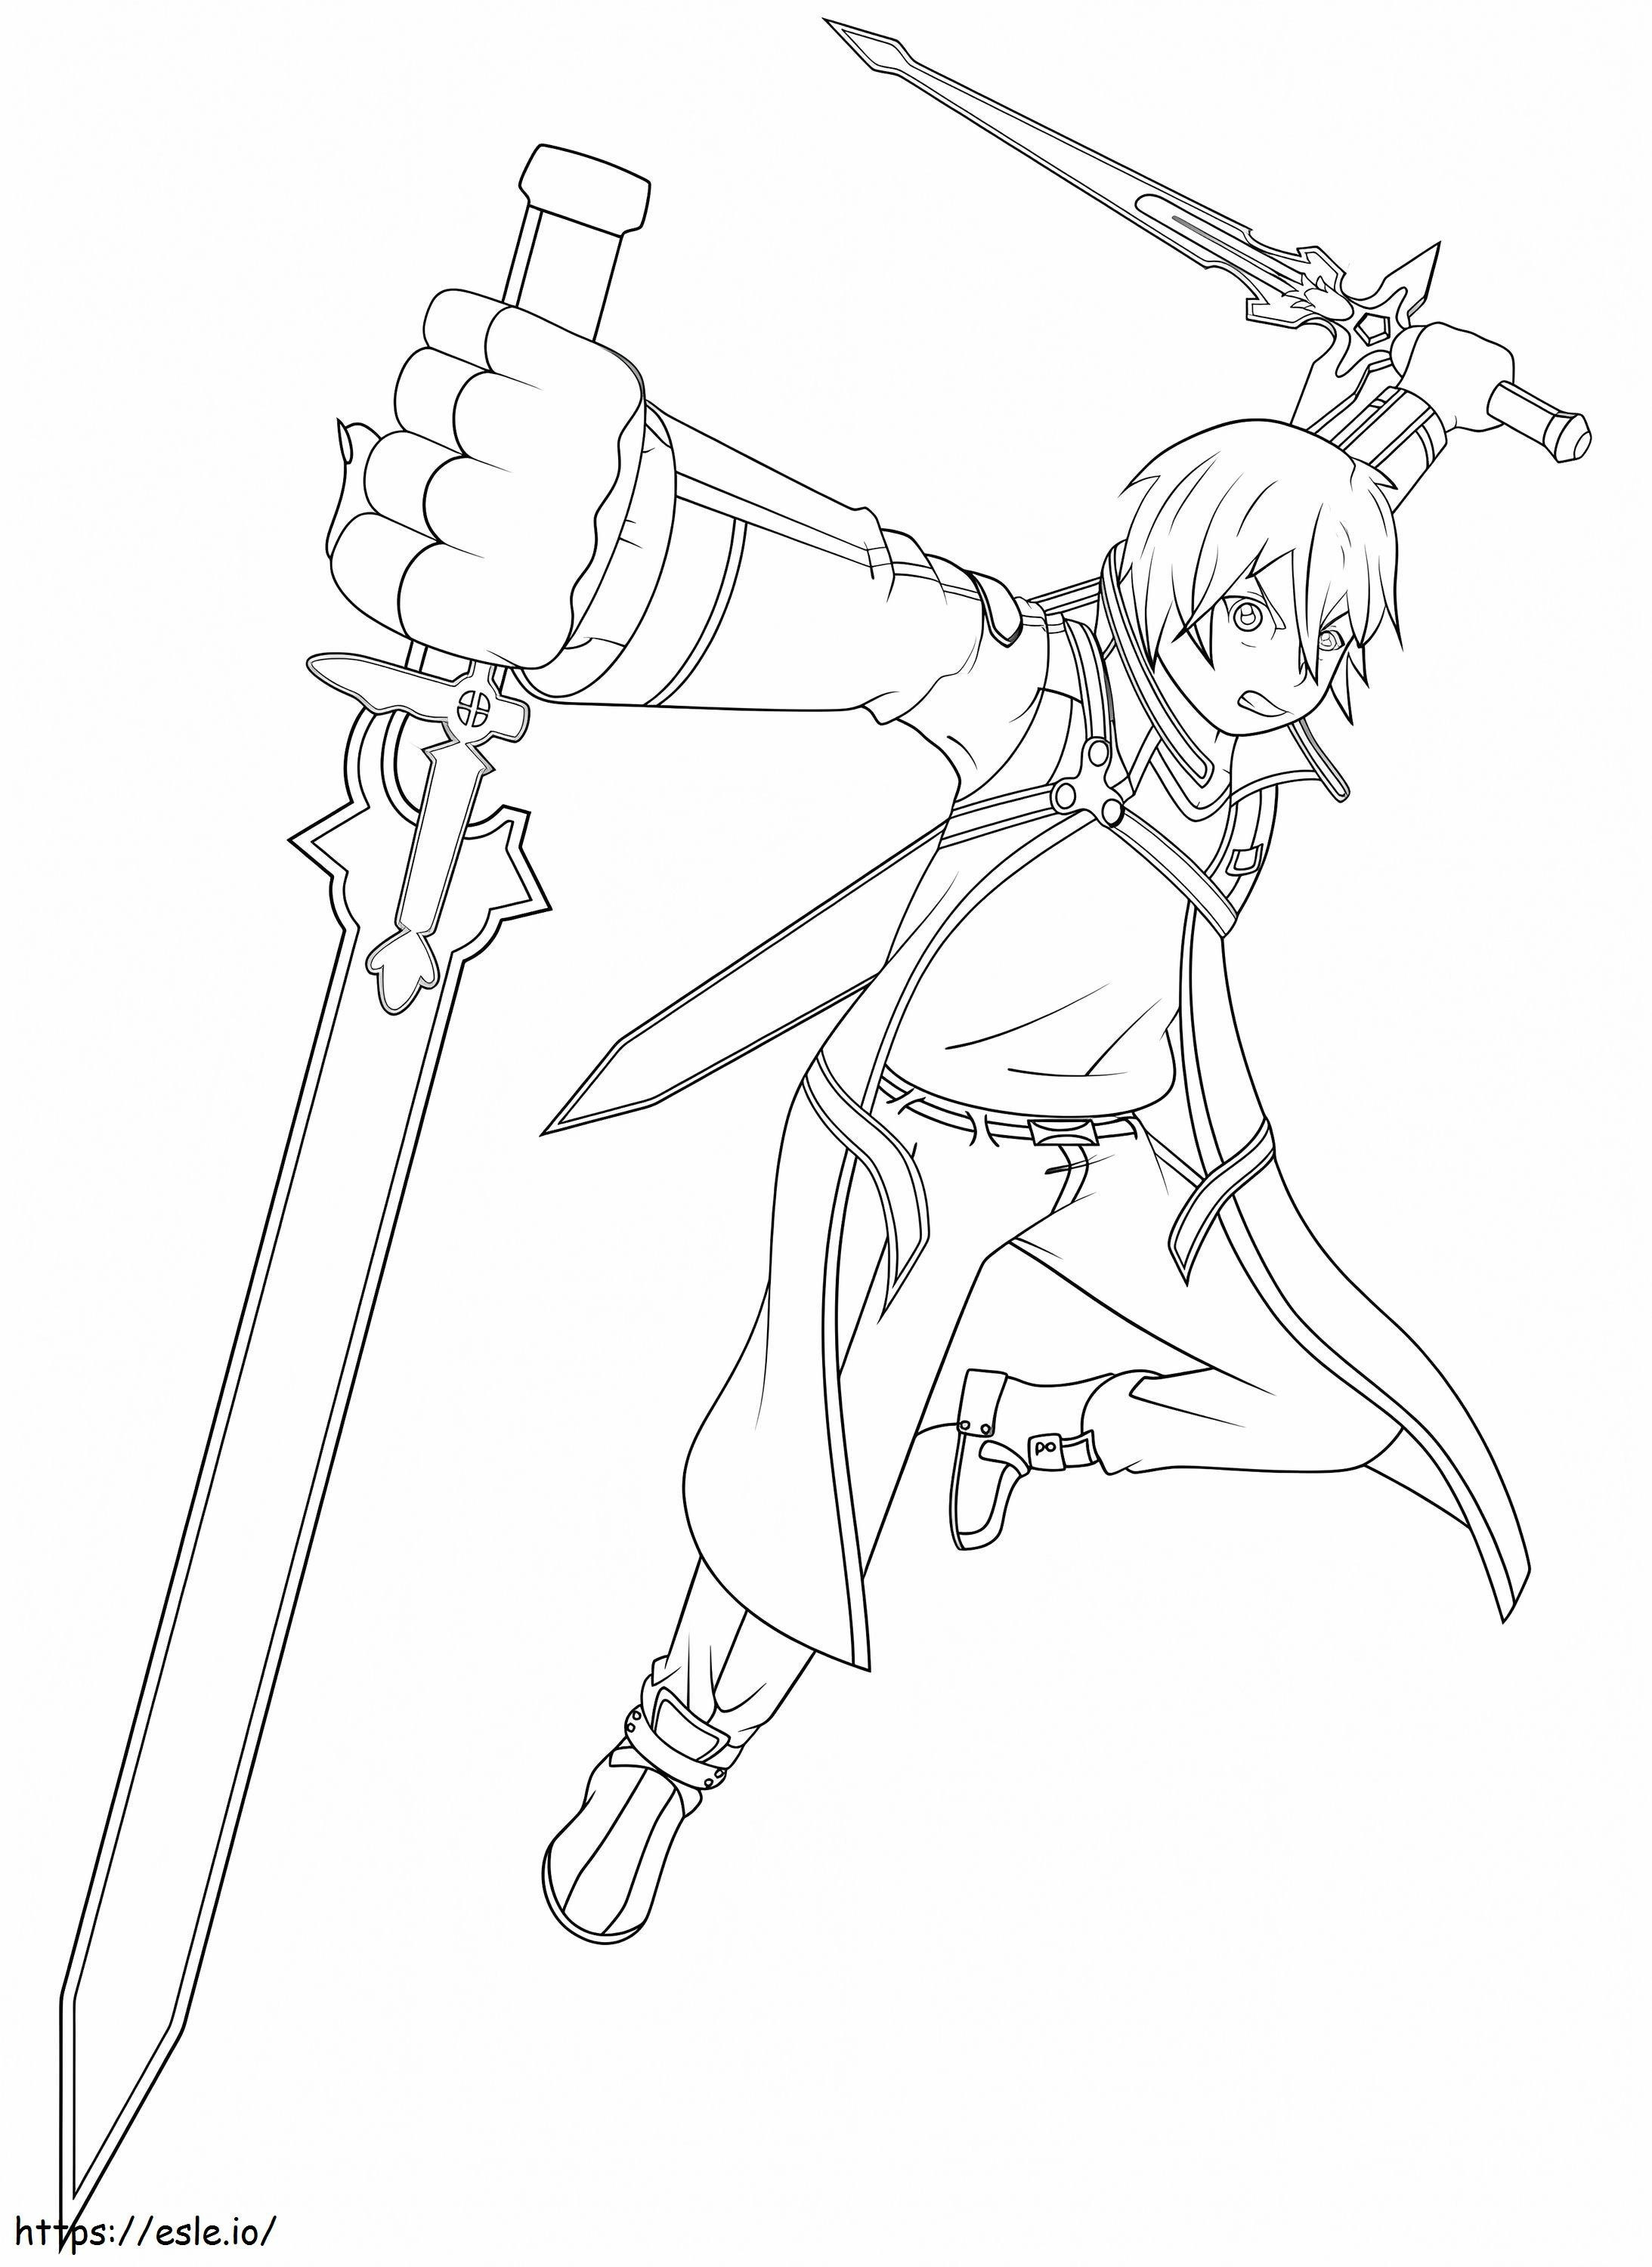 Kirito From Sword Art Online coloring page